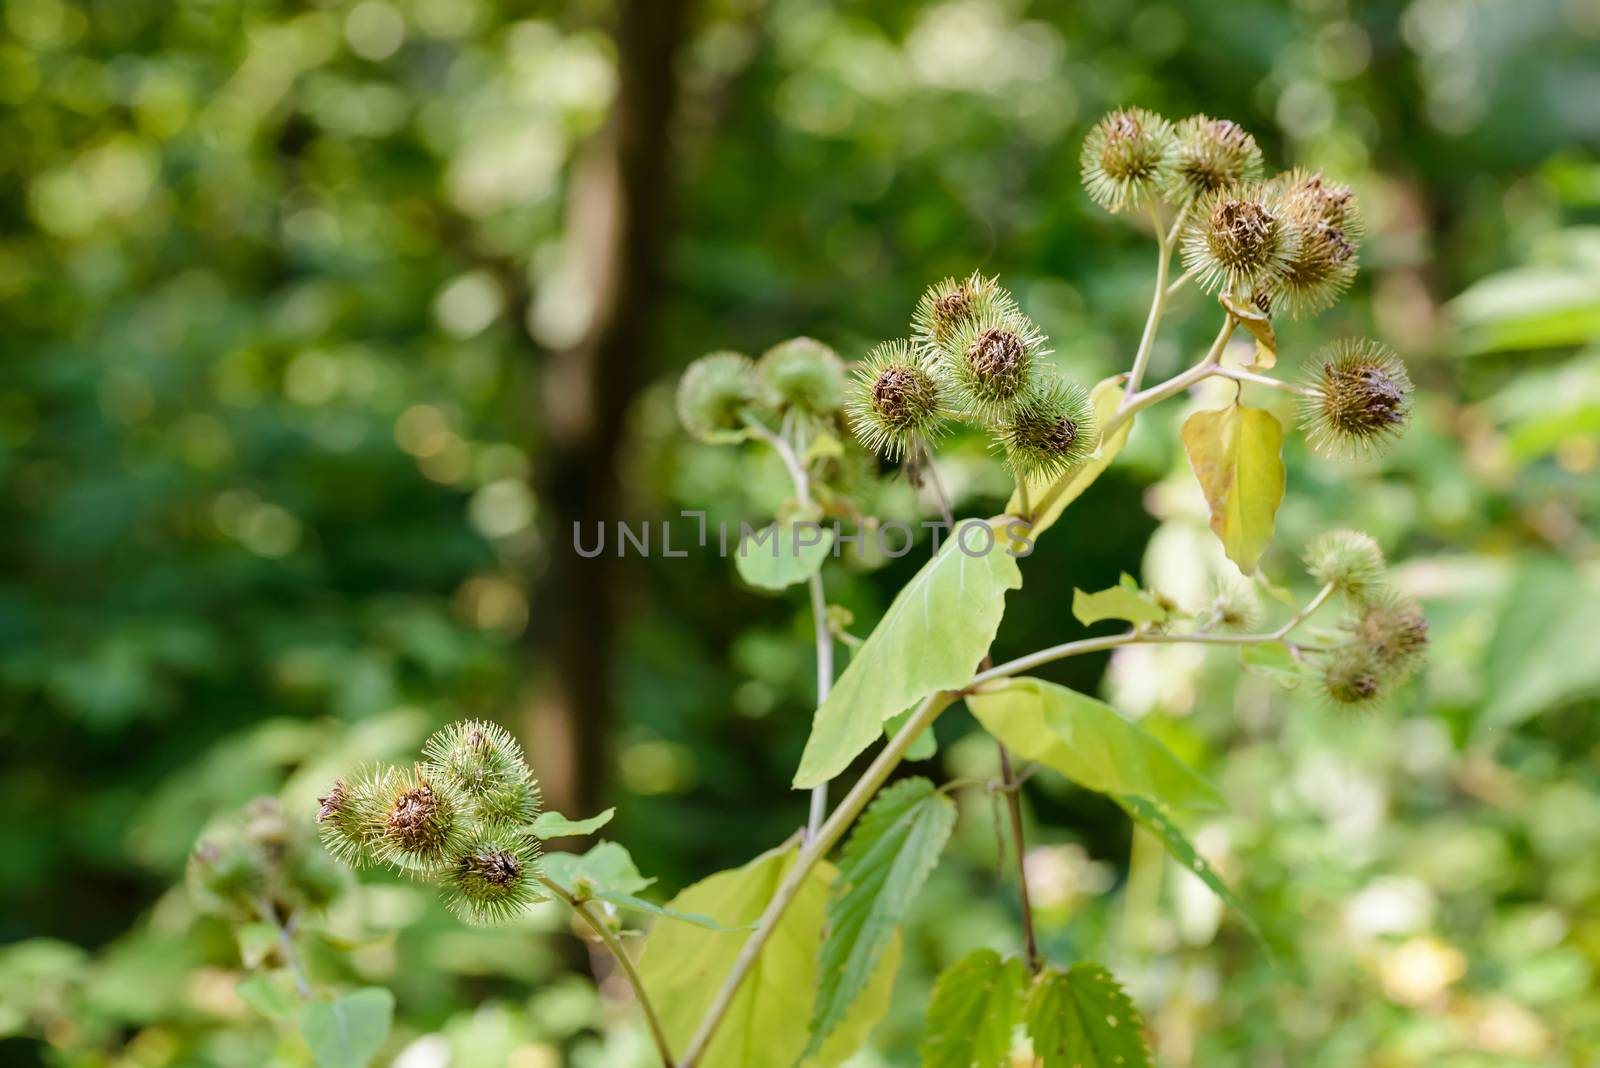 Arctium lappa, commonly called greater burdock, gobo, edible burdock, lappa, beggar's buttons, thorny burr, or happy major is a Eurasian species of plants in the sunflower family